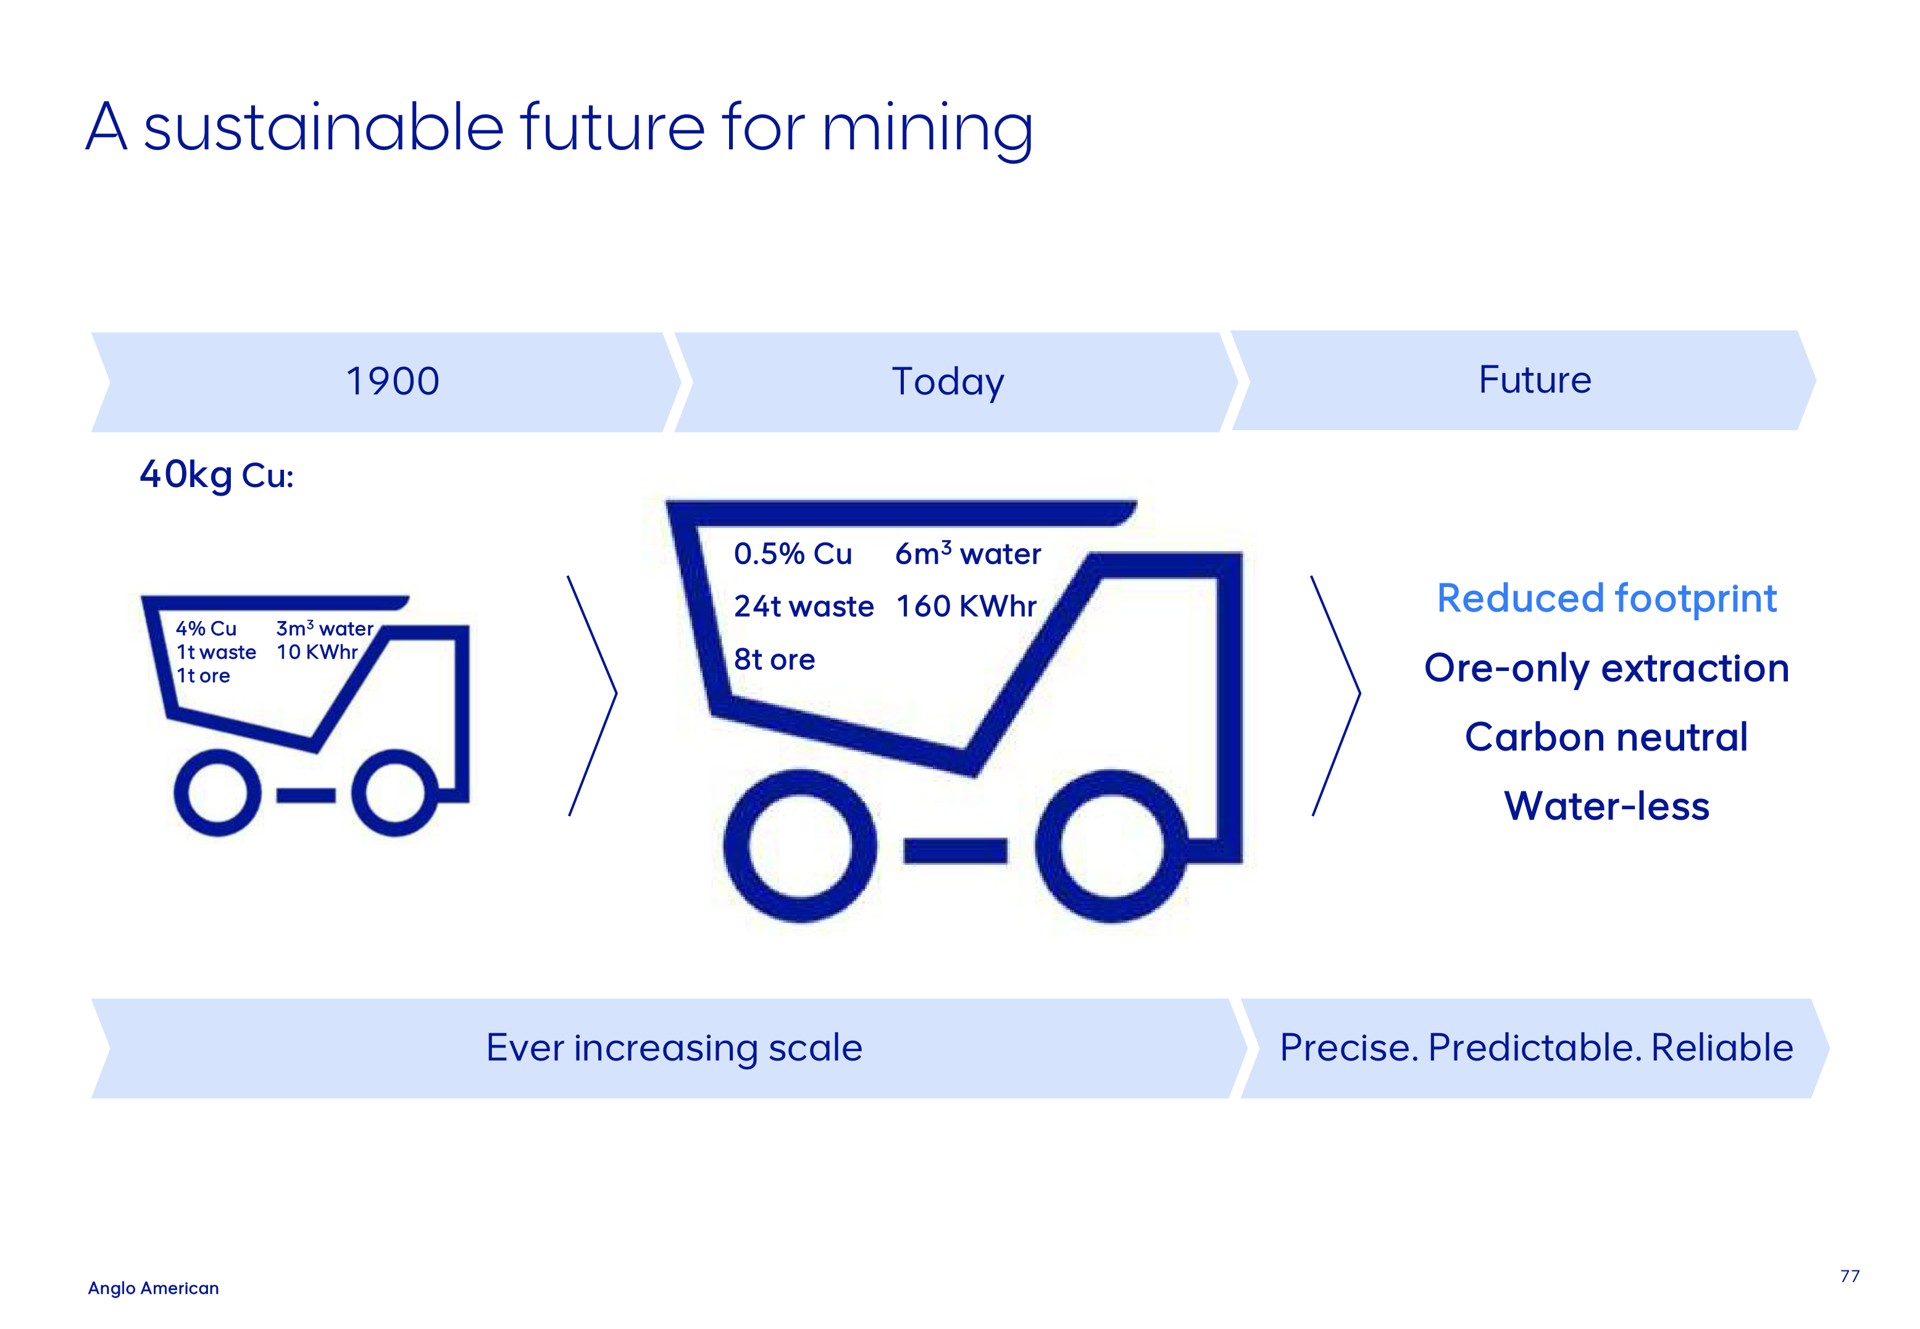 a sustainable future for mining today water water waste ore reduced footprint ore only extraction carbon neutral water less ever increasing scale precise predictable reliable | AngloAmerican